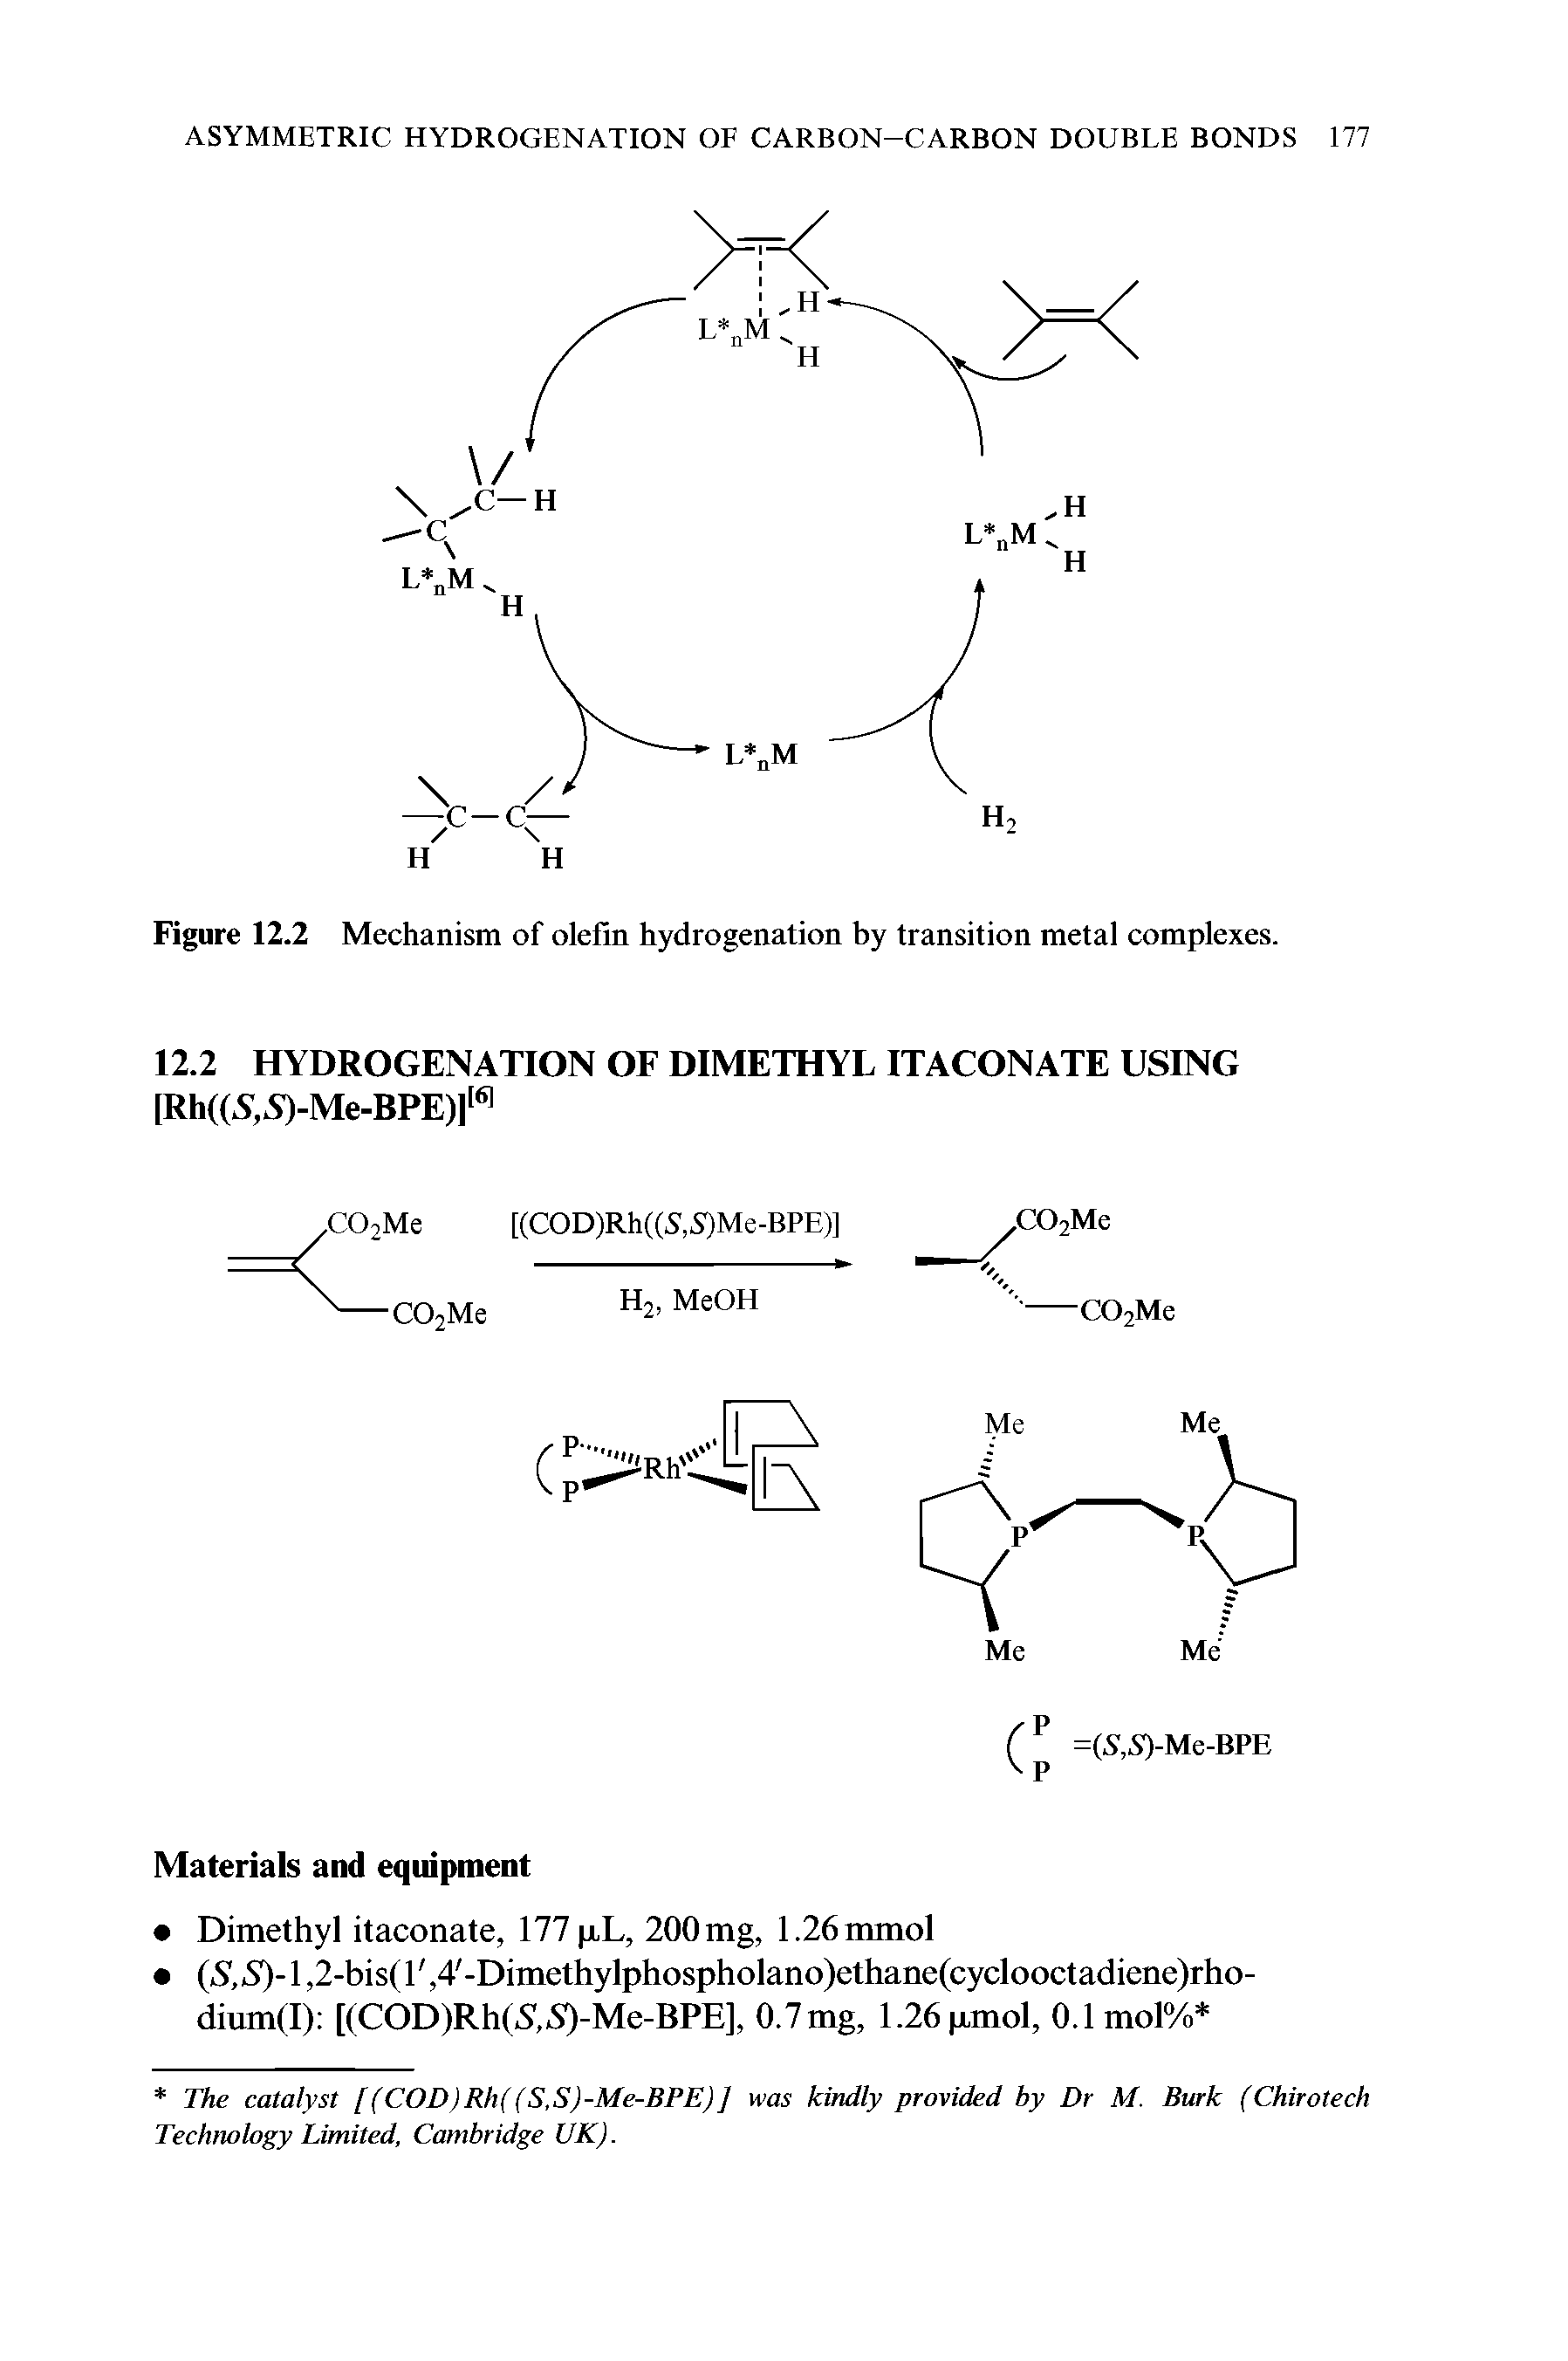 Figure 12.2 Mechanism of olefin hydrogenation by transition metal complexes.